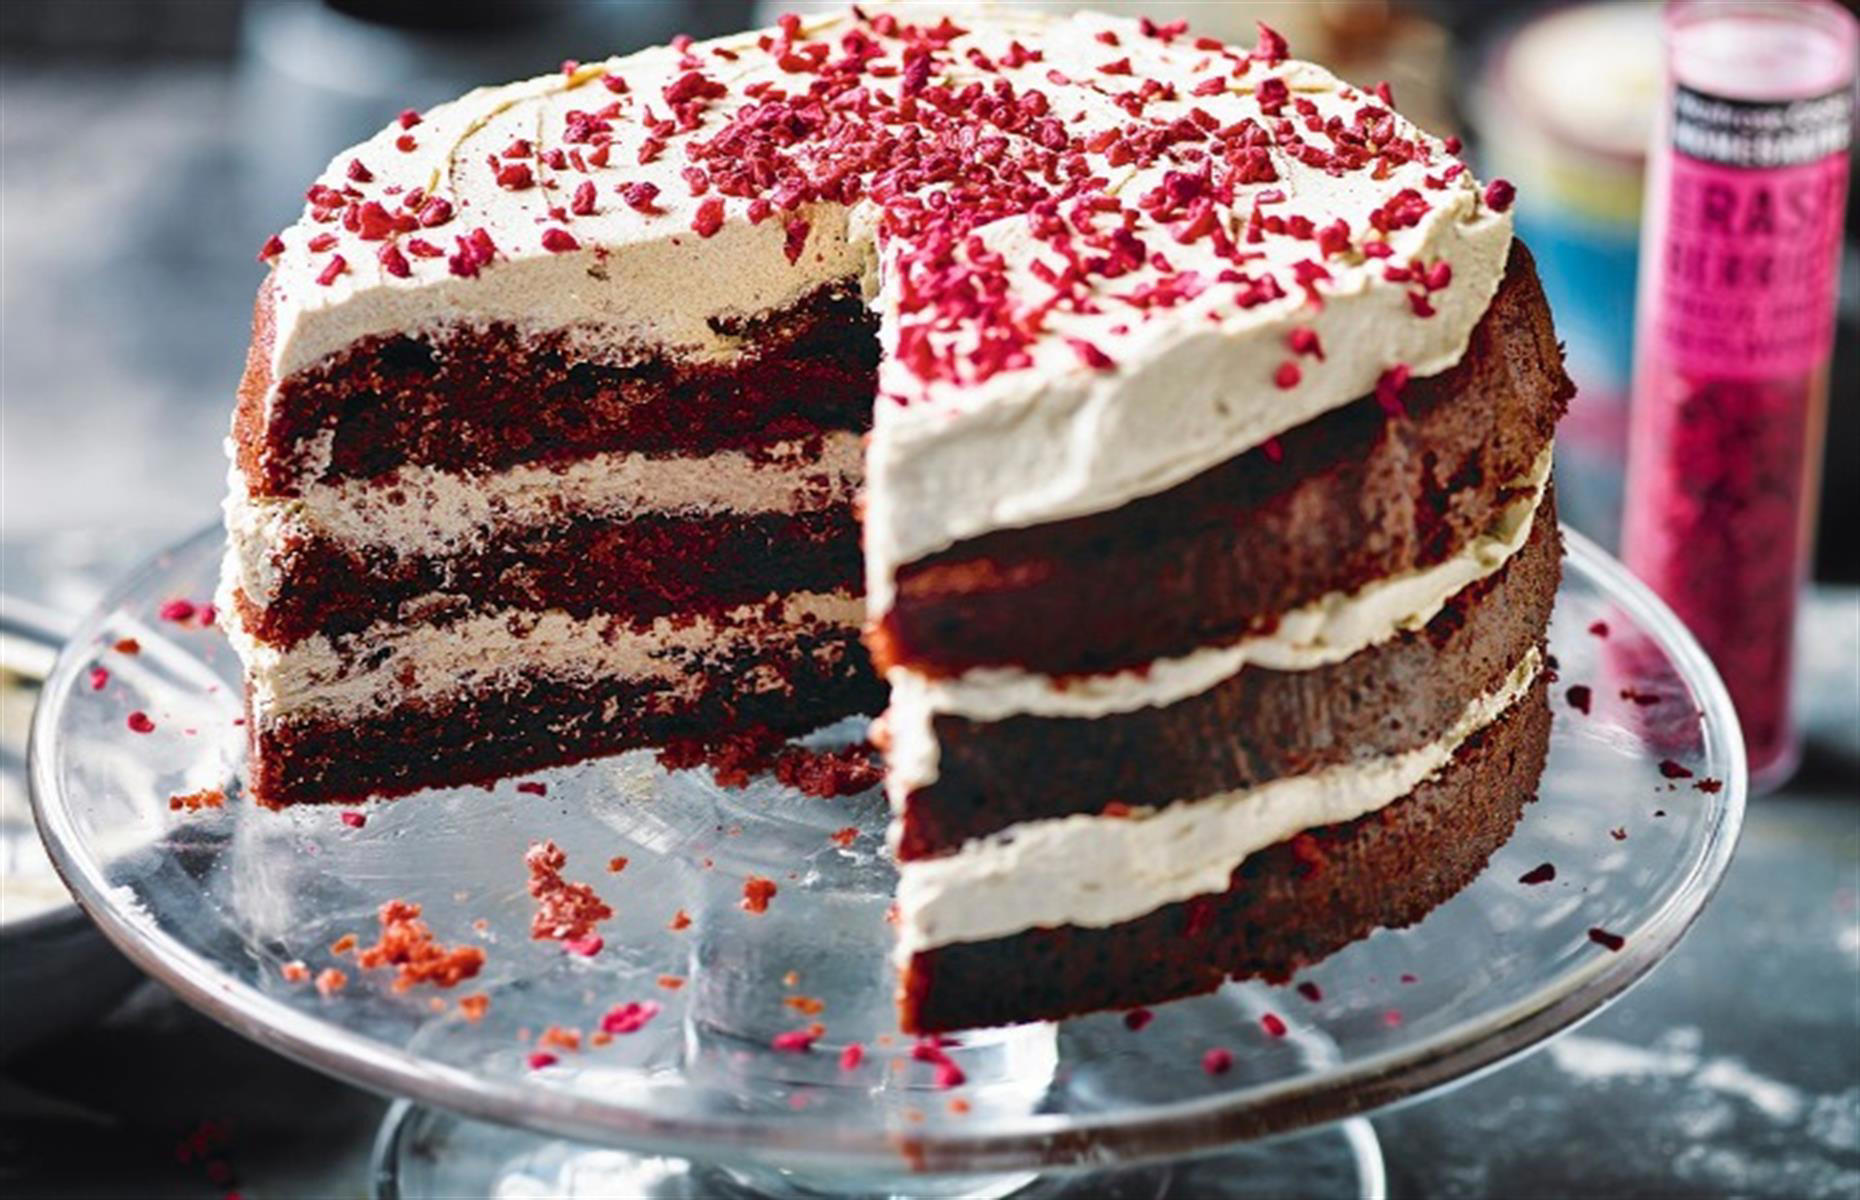 50 Mouth Watering Cake Recipes For All Occasions